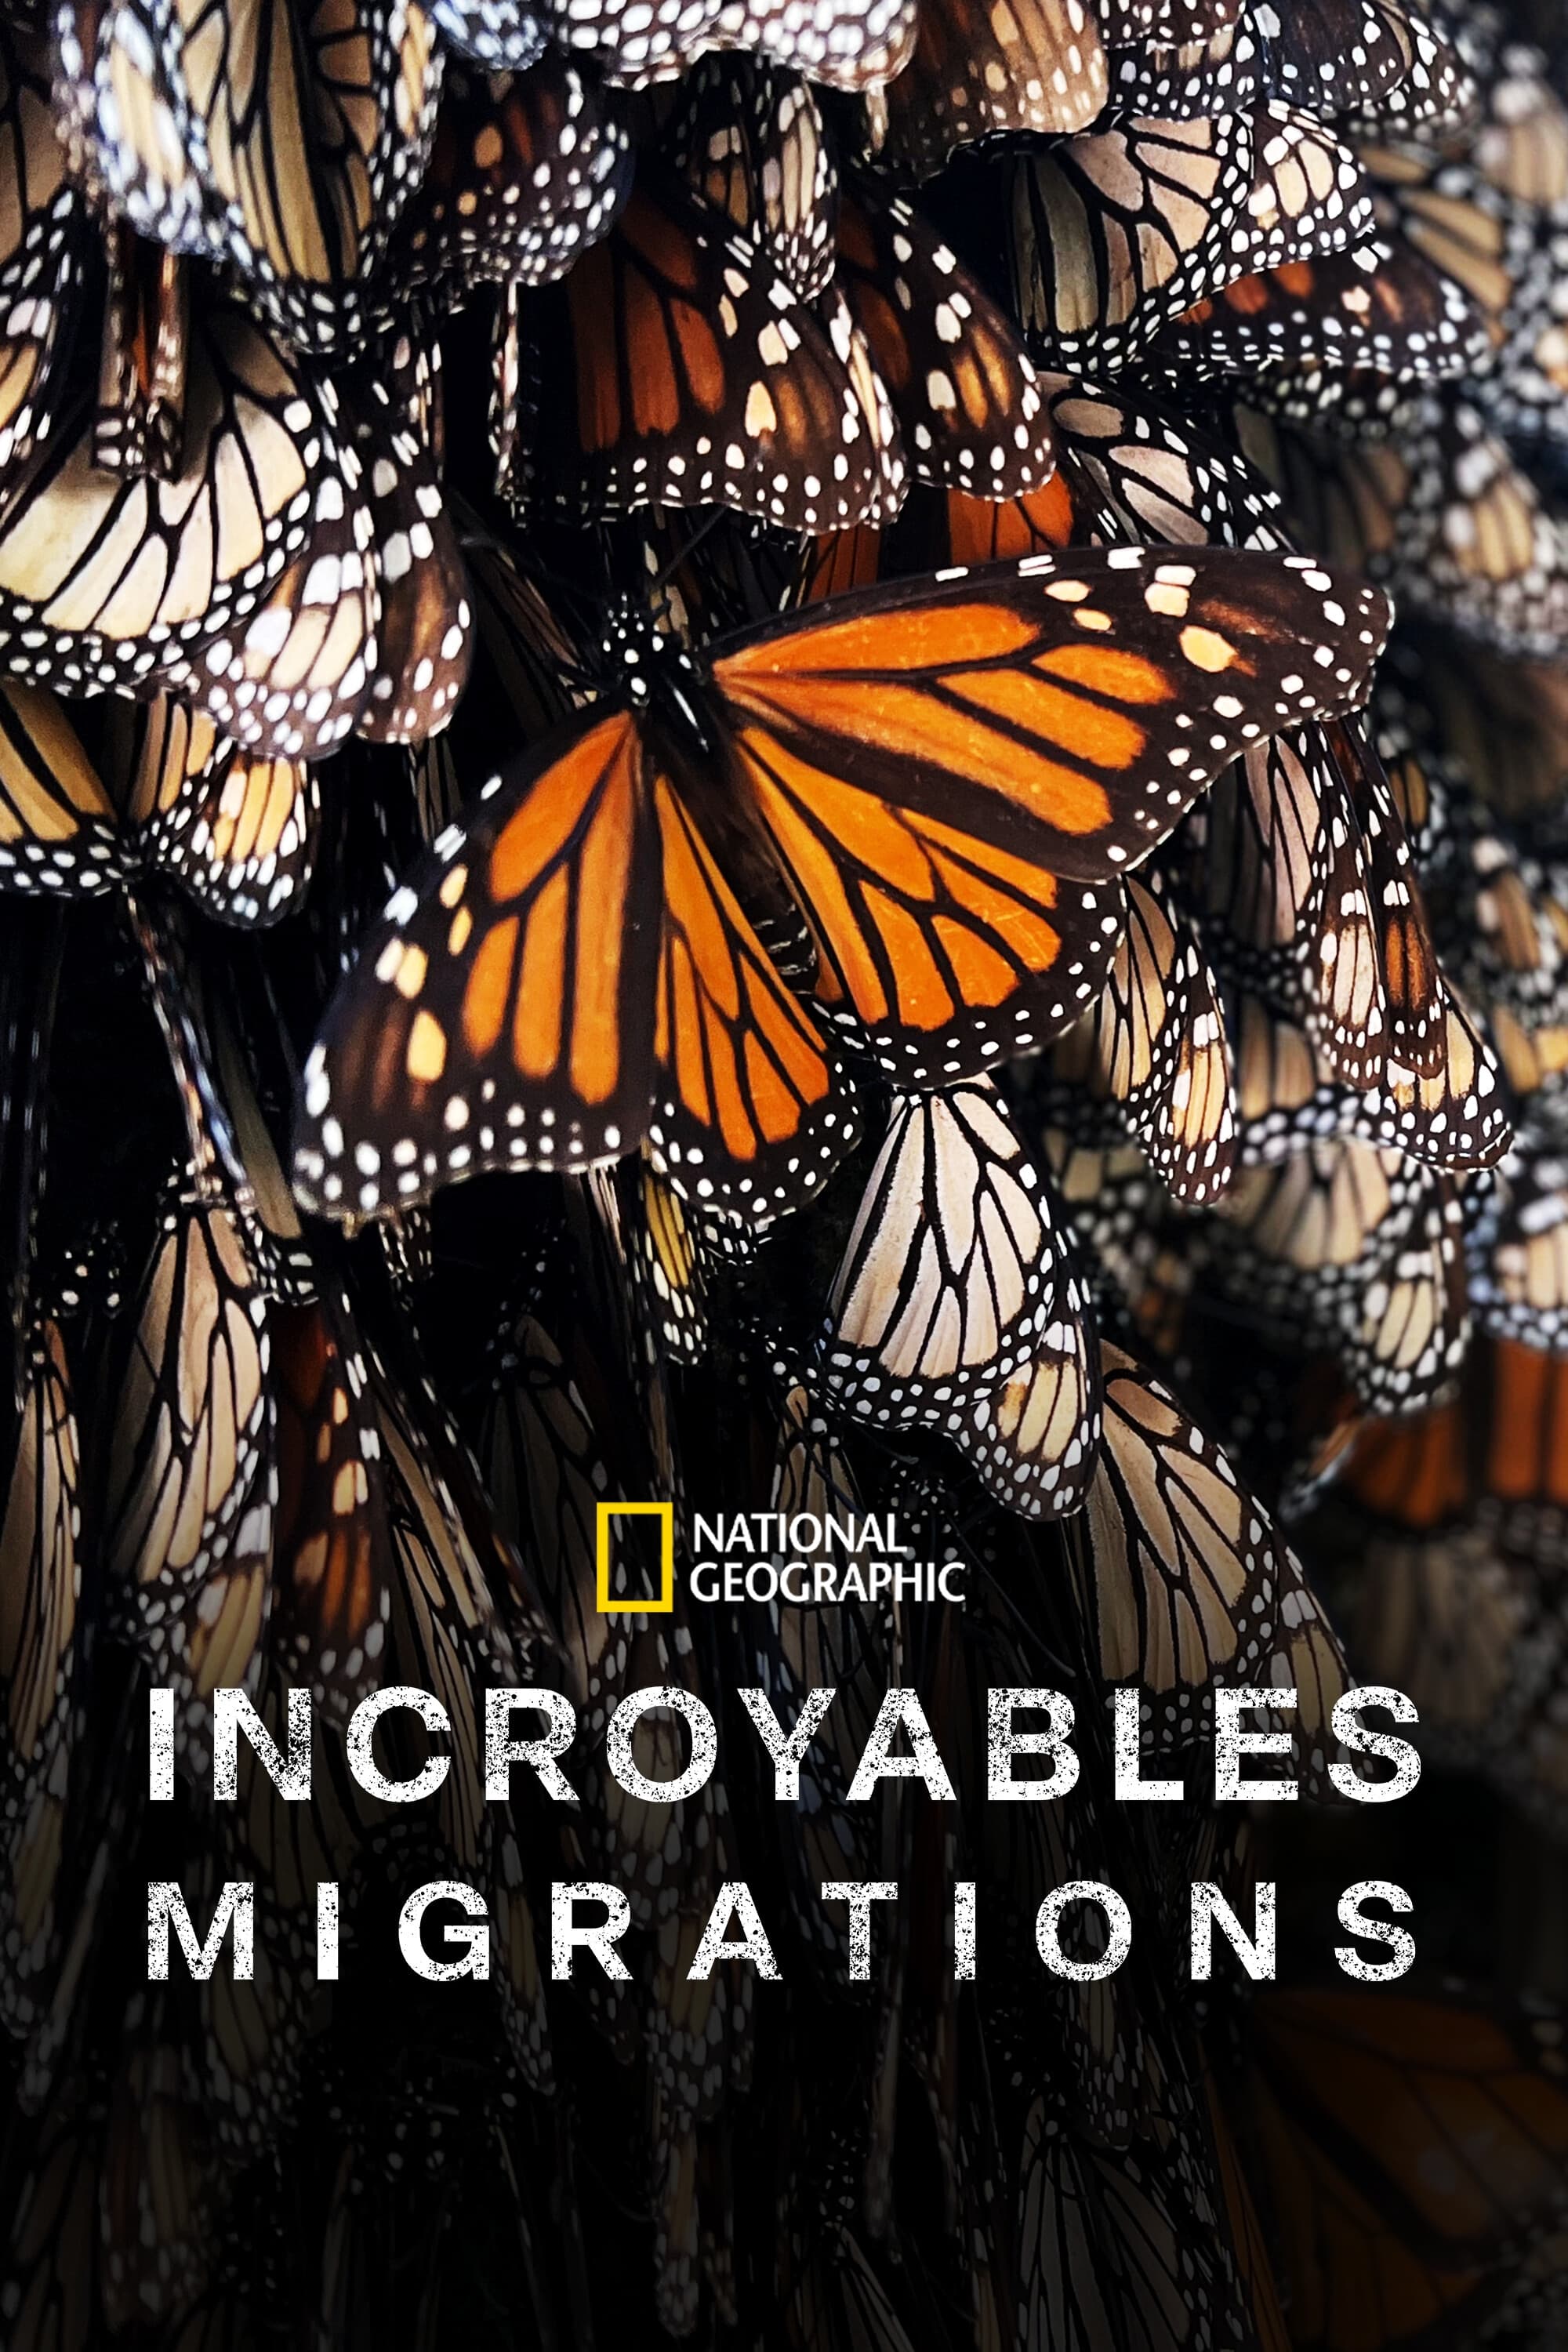 Incroyables migrations